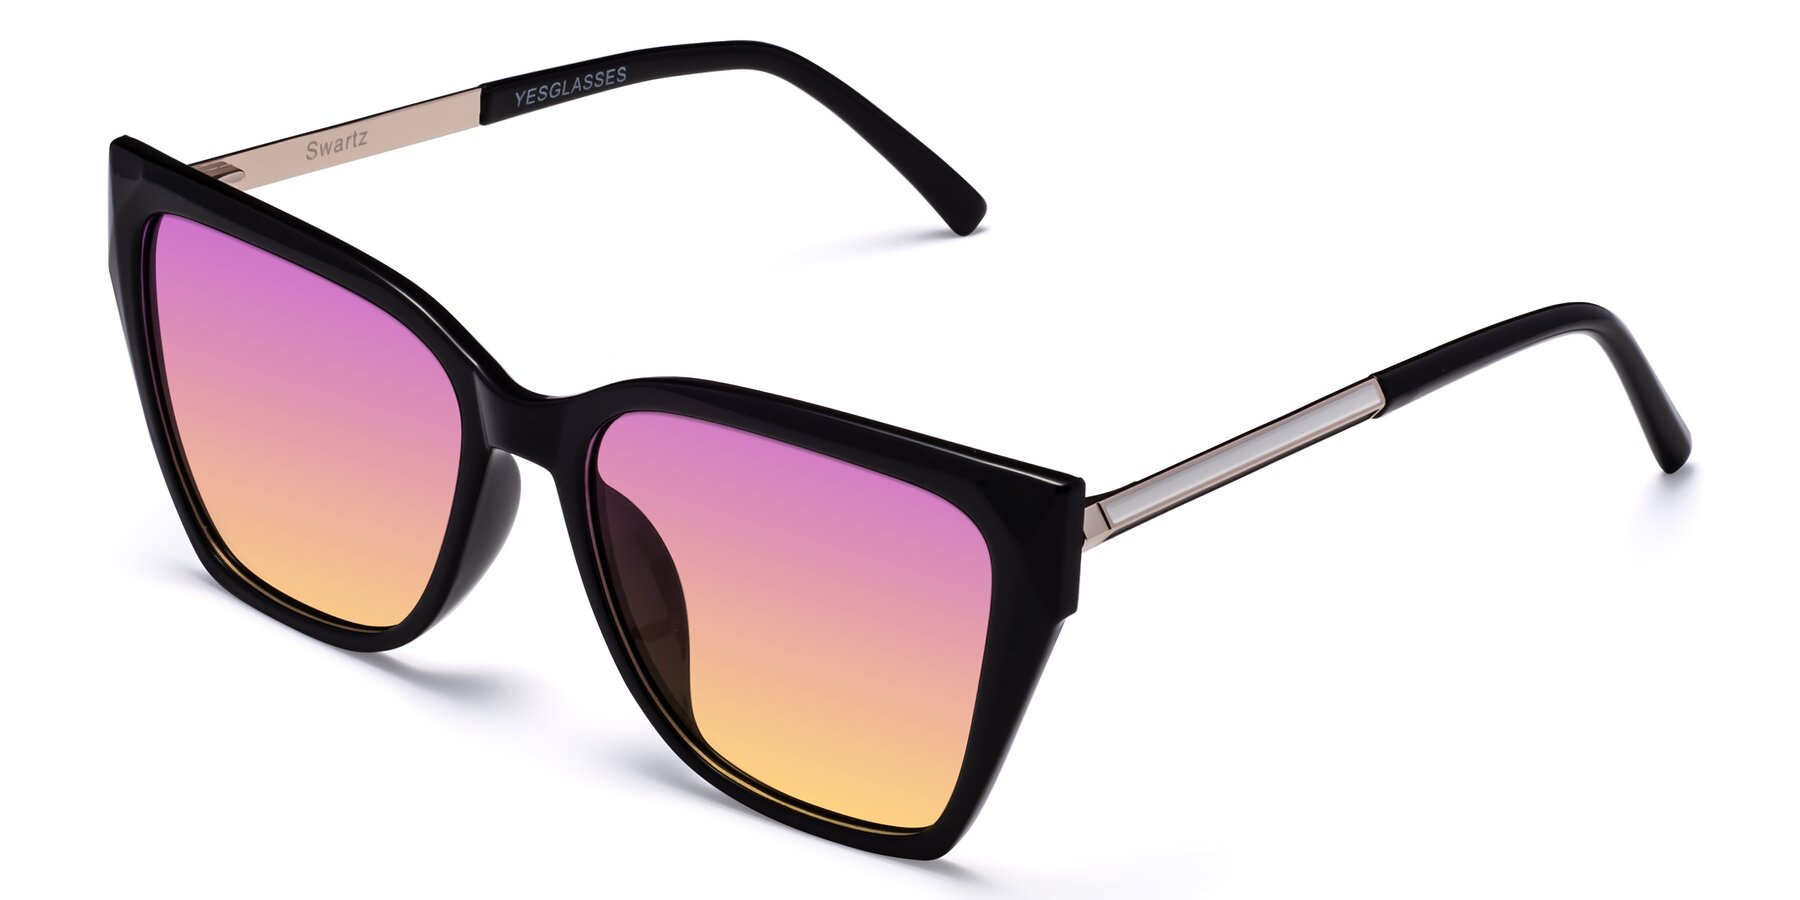 Angle of Swartz in Black with Purple / Yellow Gradient Lenses